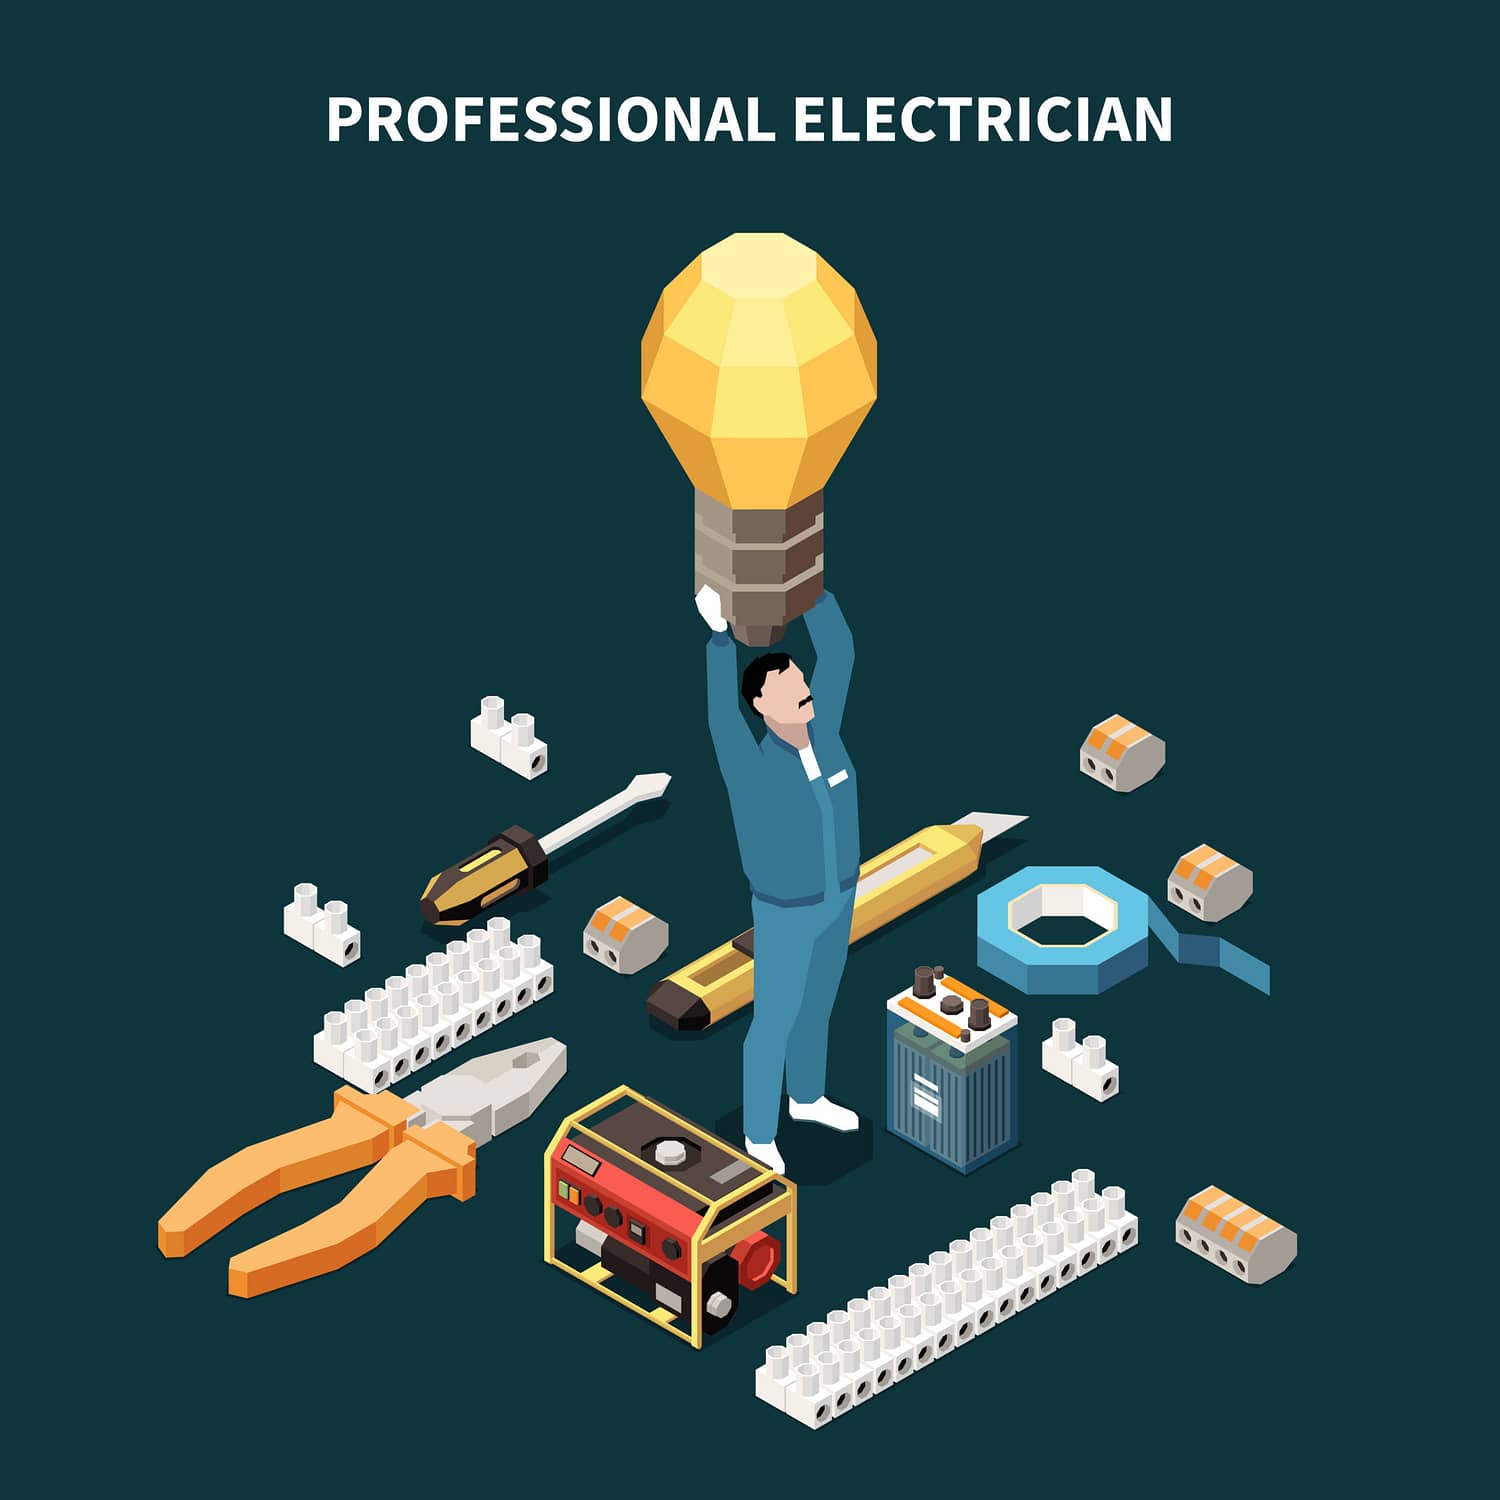 Essential Skills and Expertise for Exceptional Electrical Work